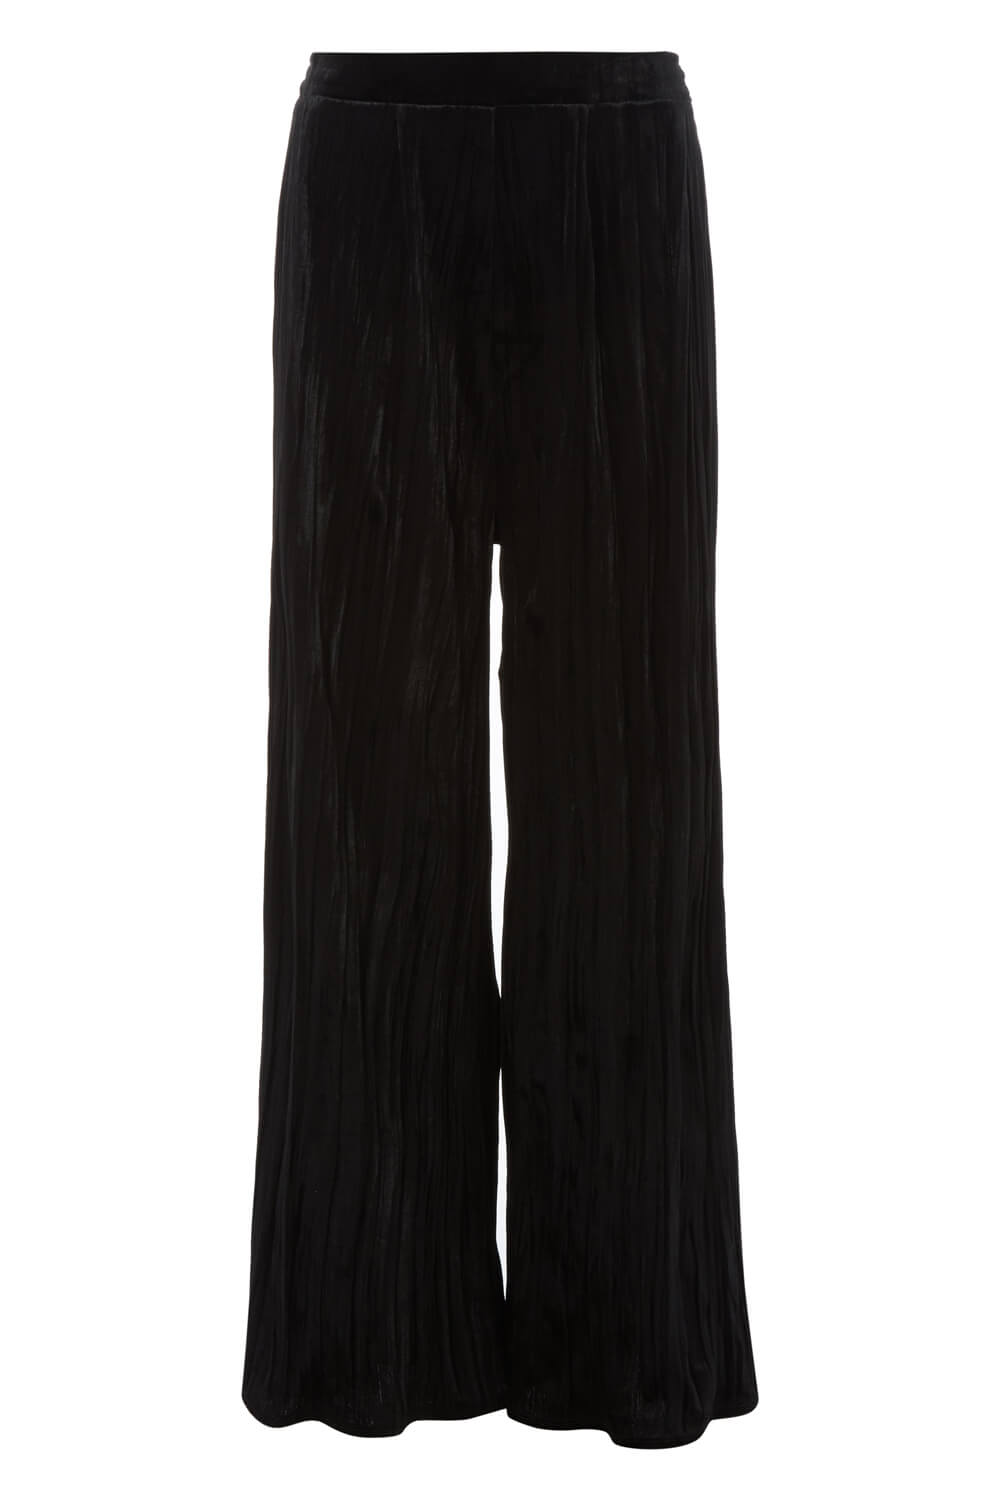 Black Crushed Velour Palazzo Trousers, Image 4 of 4